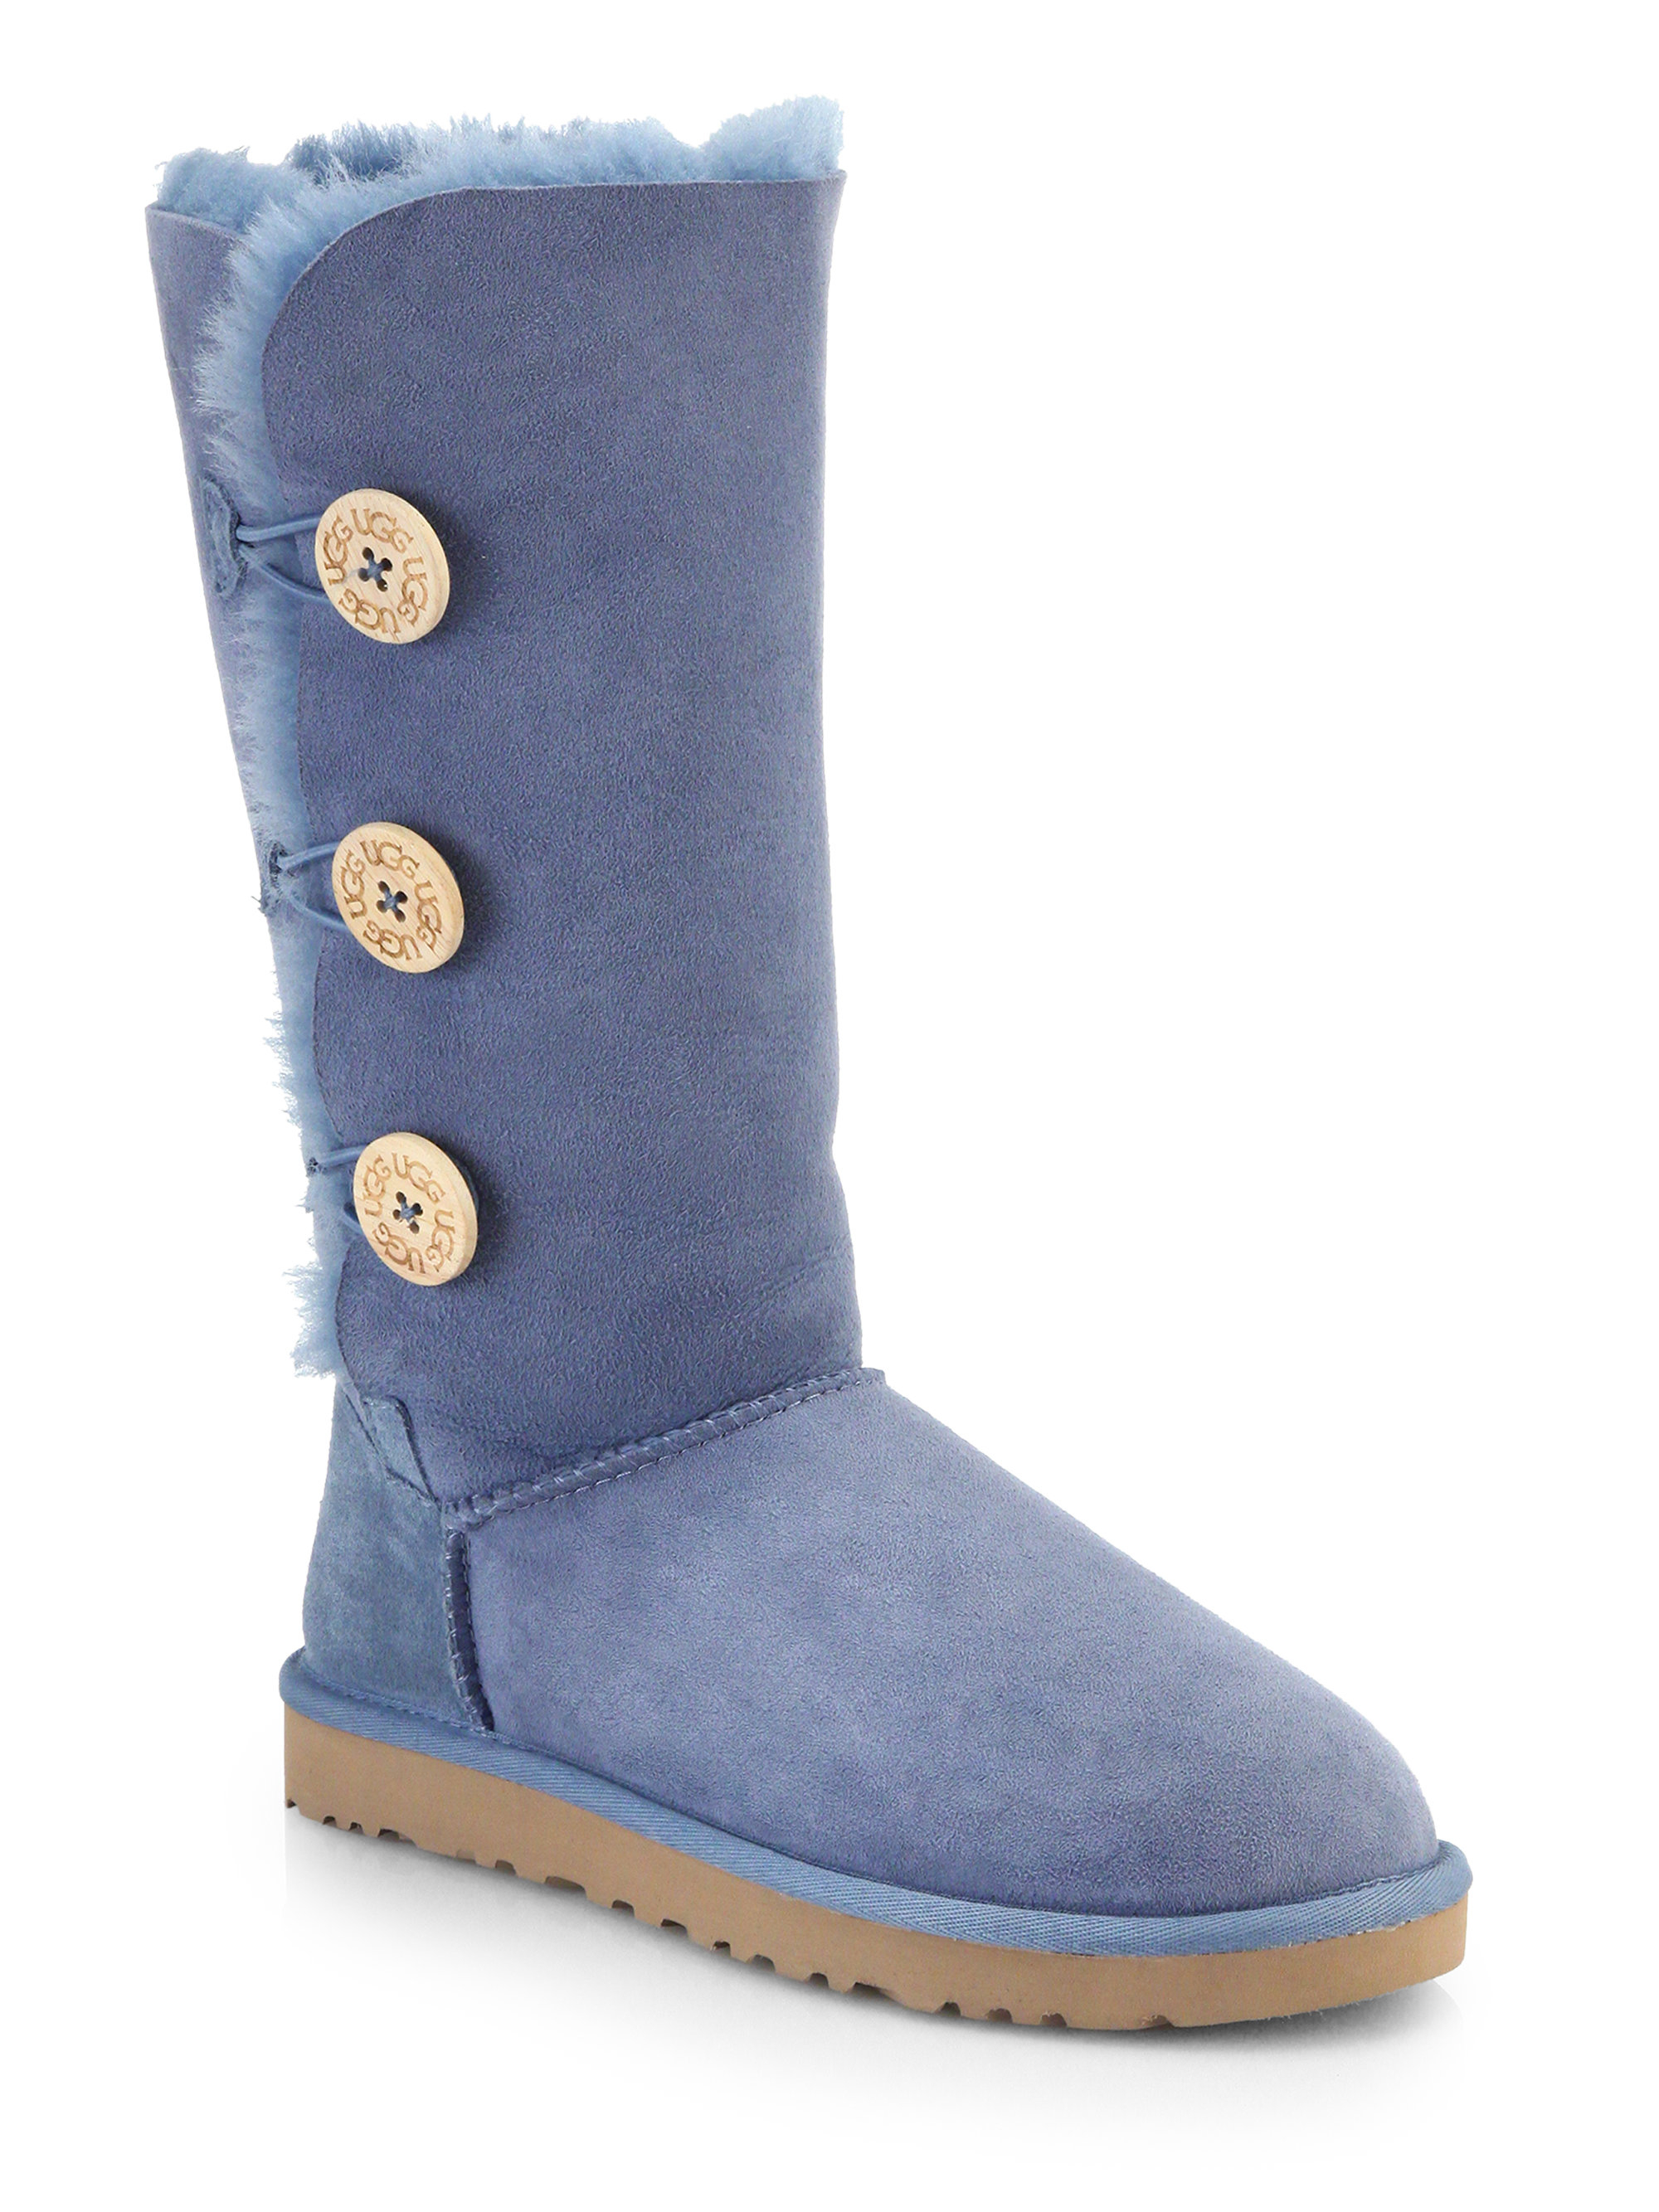 Ugg Bailey Button Knee-high Shearling Boots in Blue | Lyst